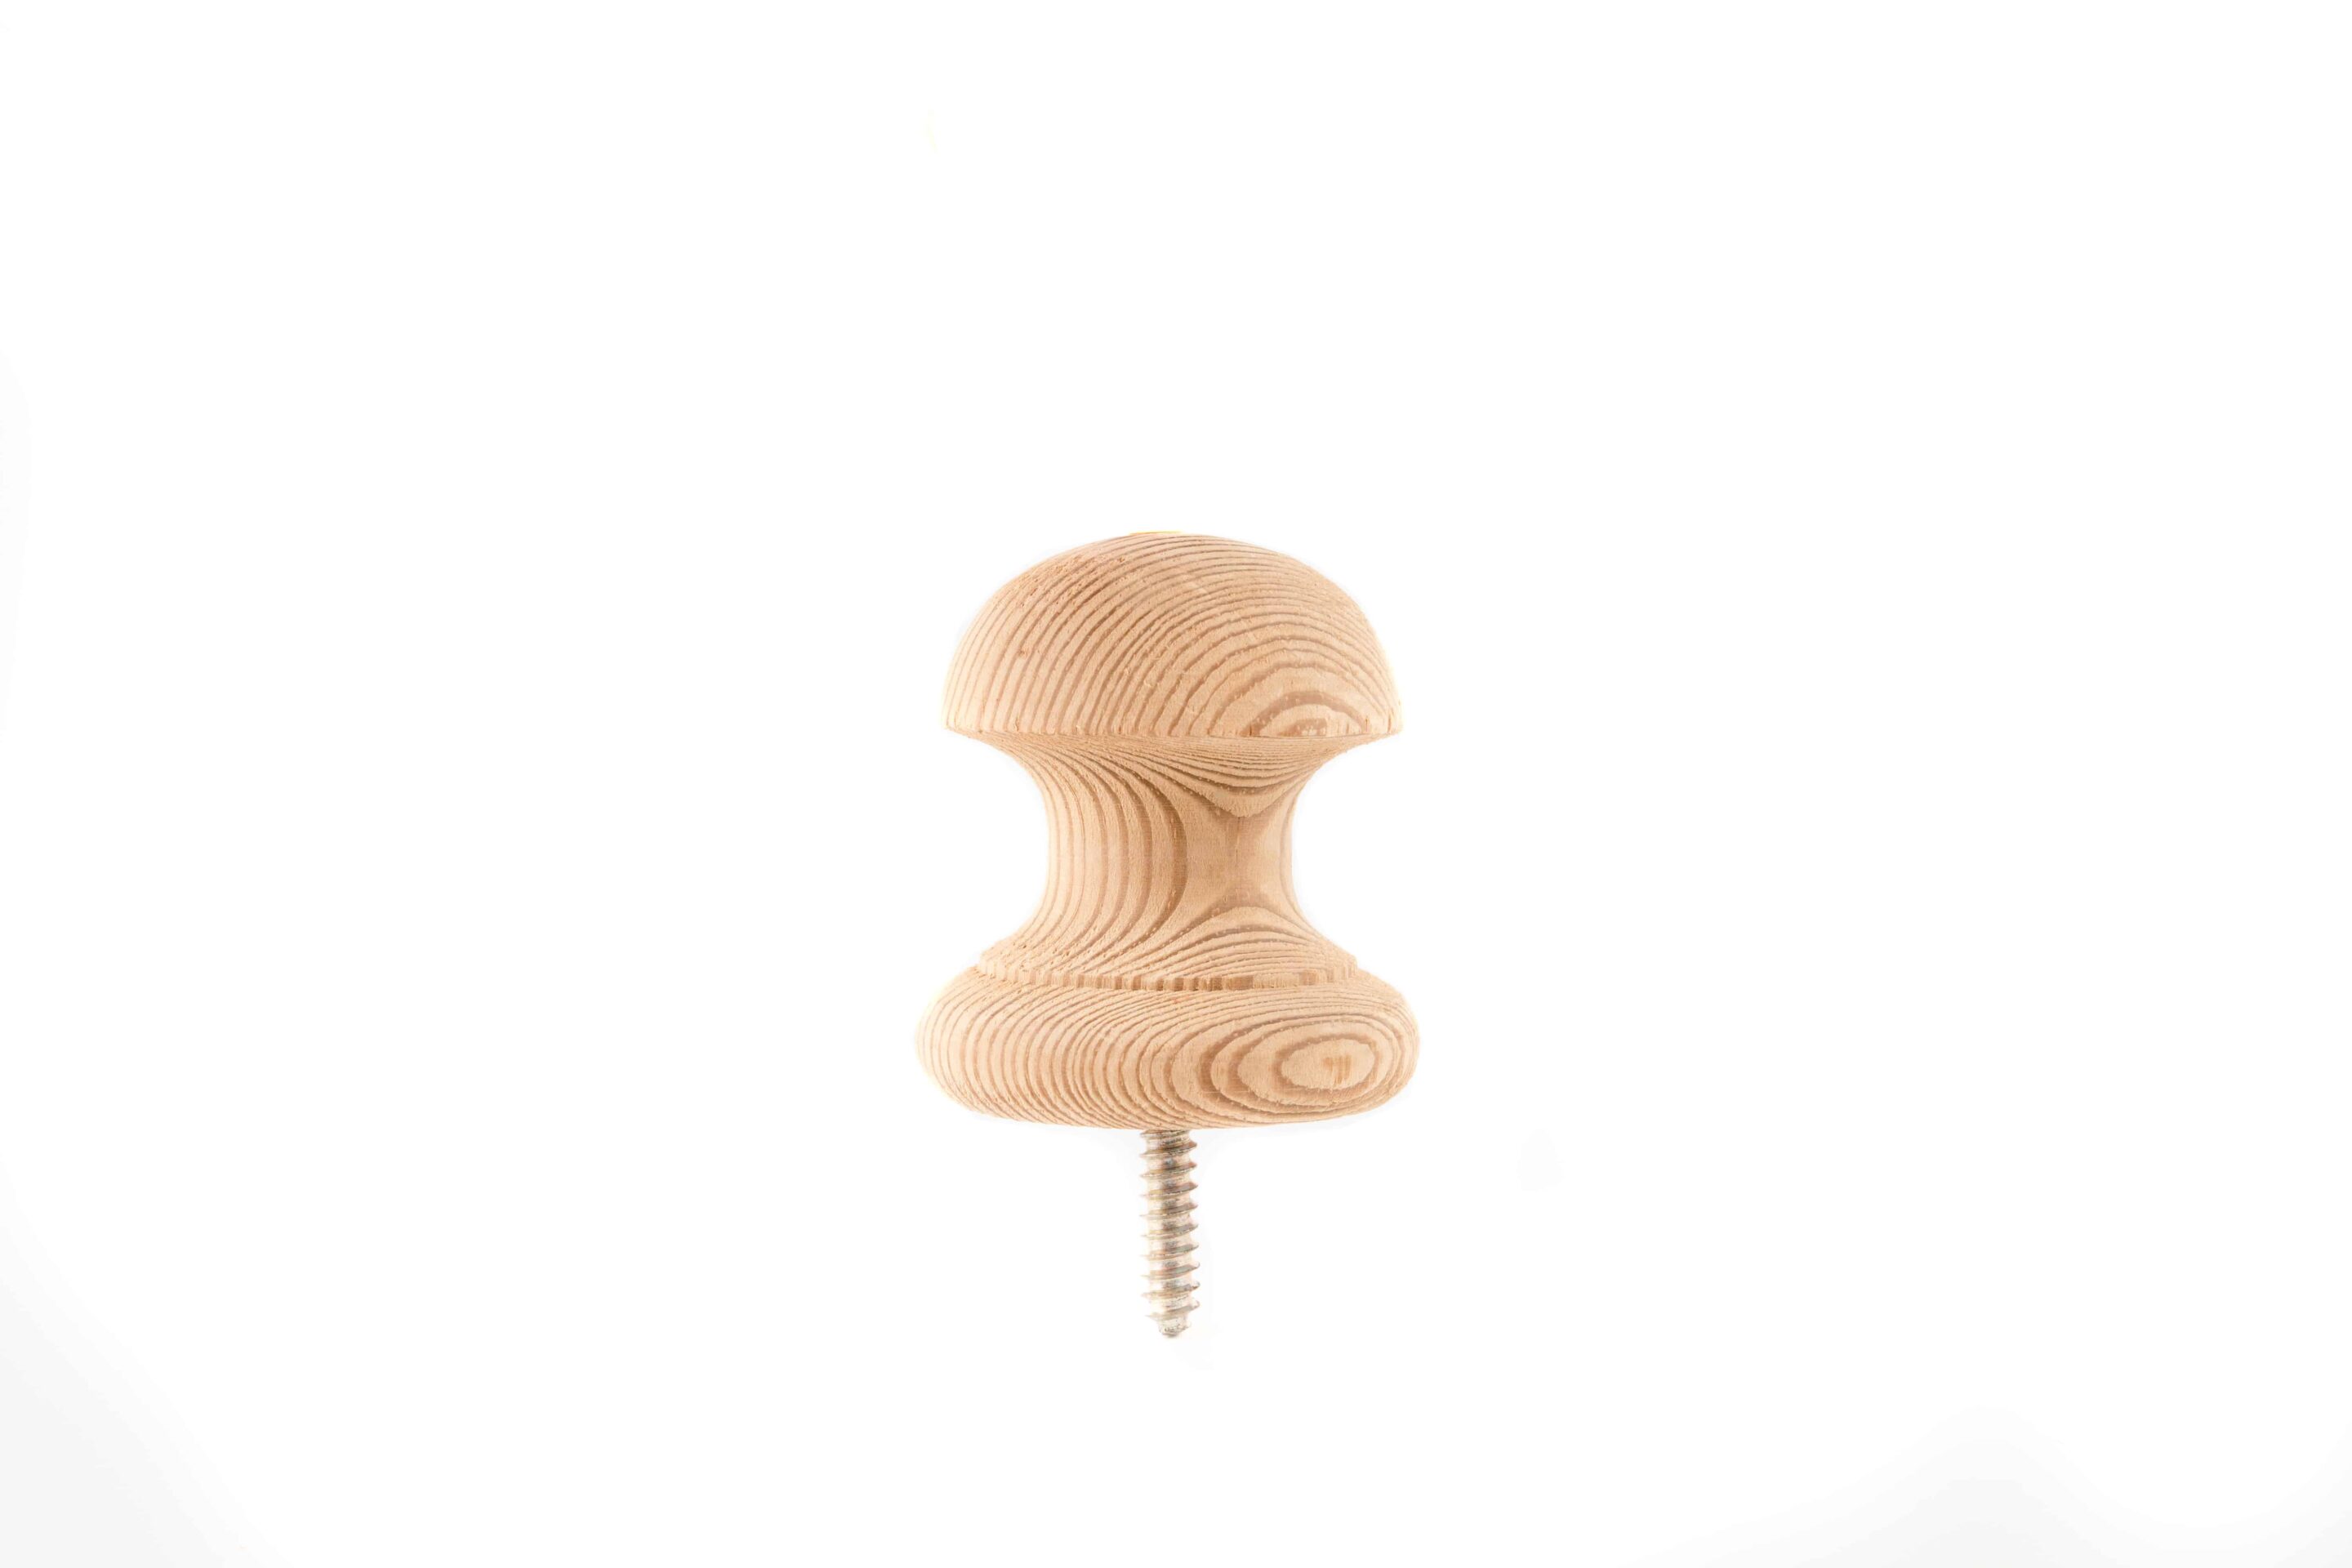 Mushroom Ball Treated Finial Island, Wooden Bed Post Toppers Home Depot